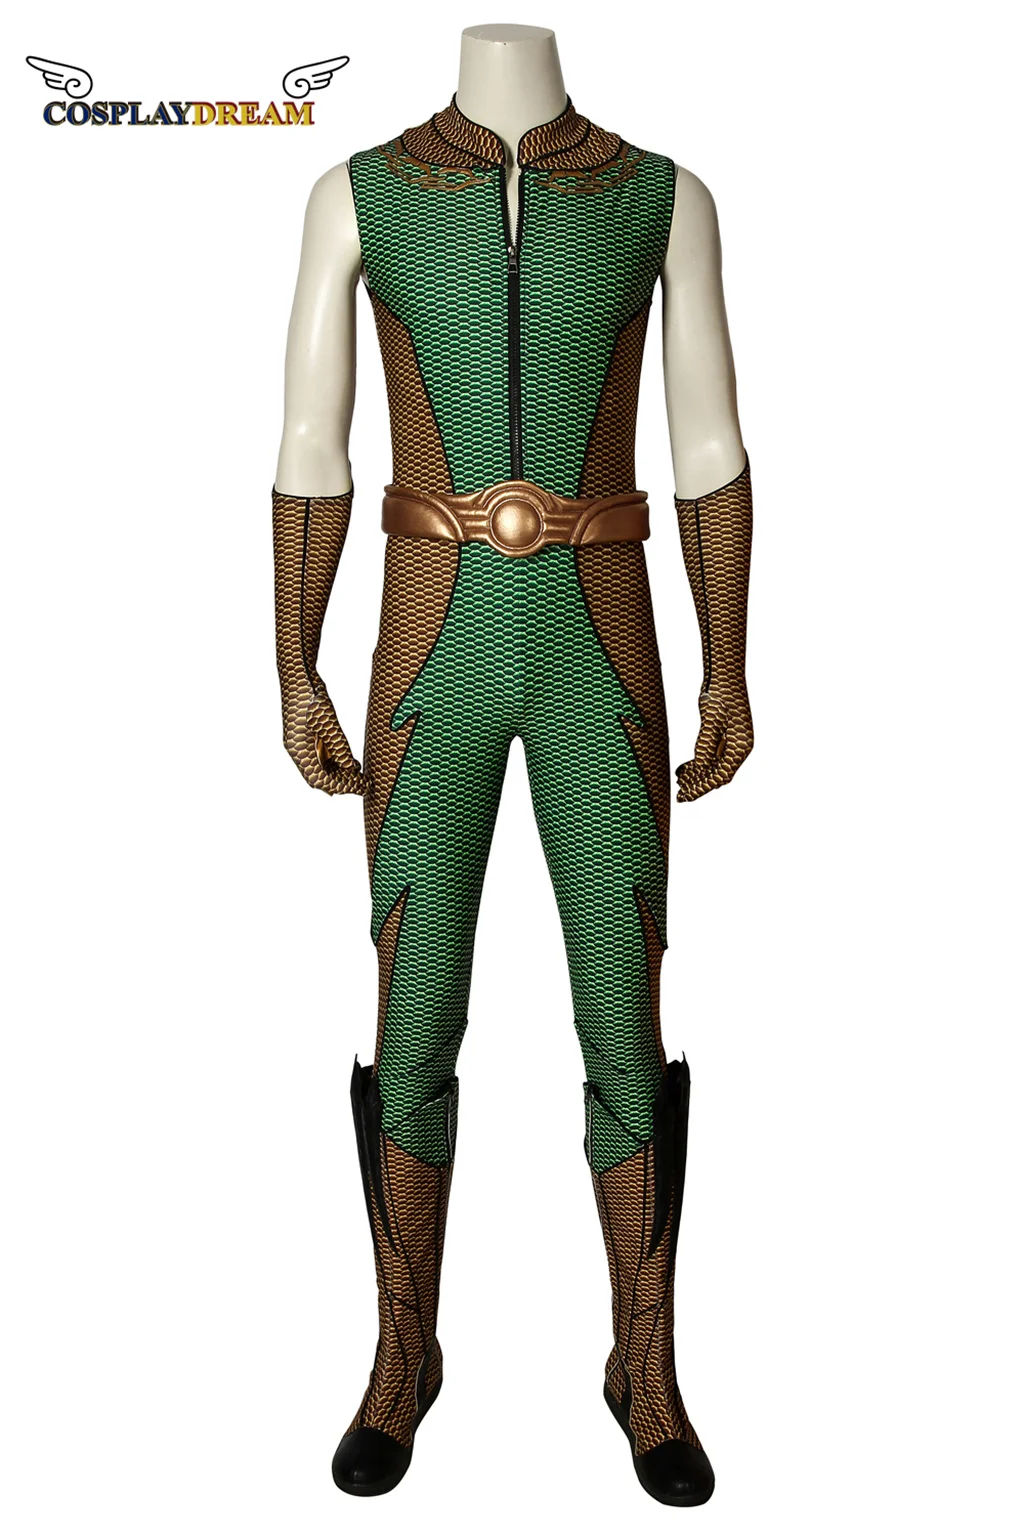 

The Deep Cosplay Superhero Costume Fancy Halloween Carnival Outfit The Boys Green Battle Bodysuit Full Set With Boots